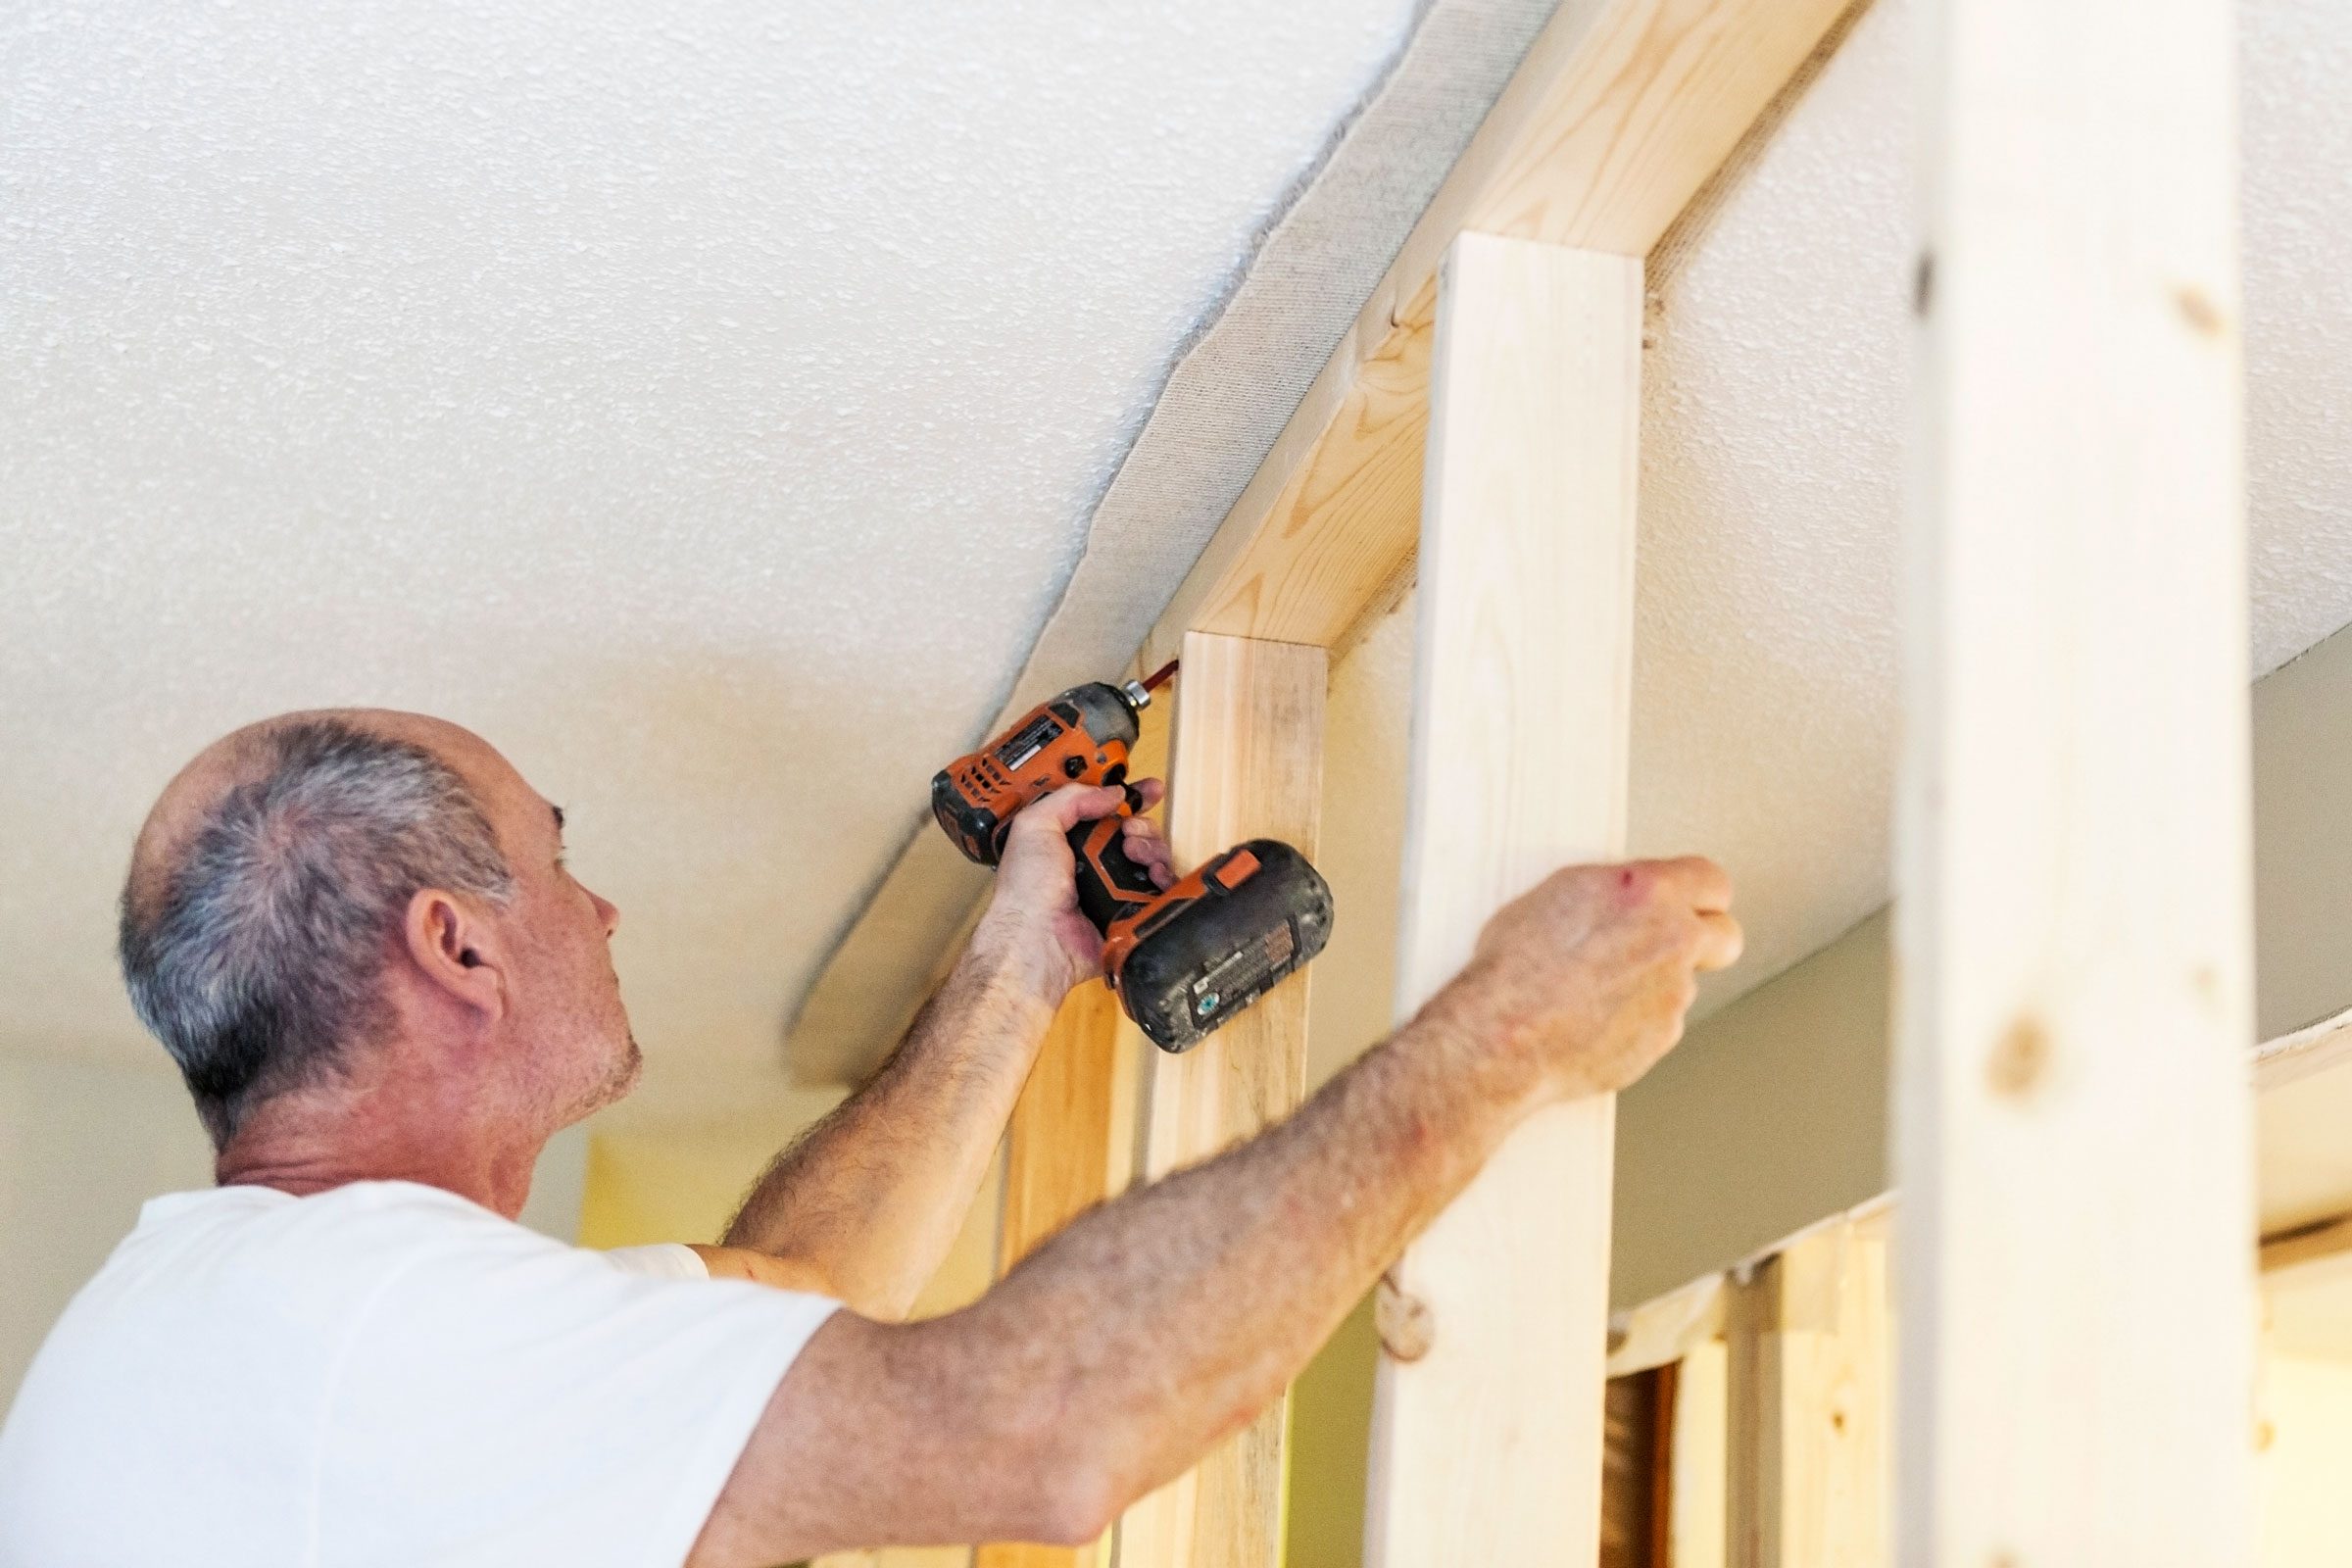 man drilling into a stud on a support wall during a home renovation